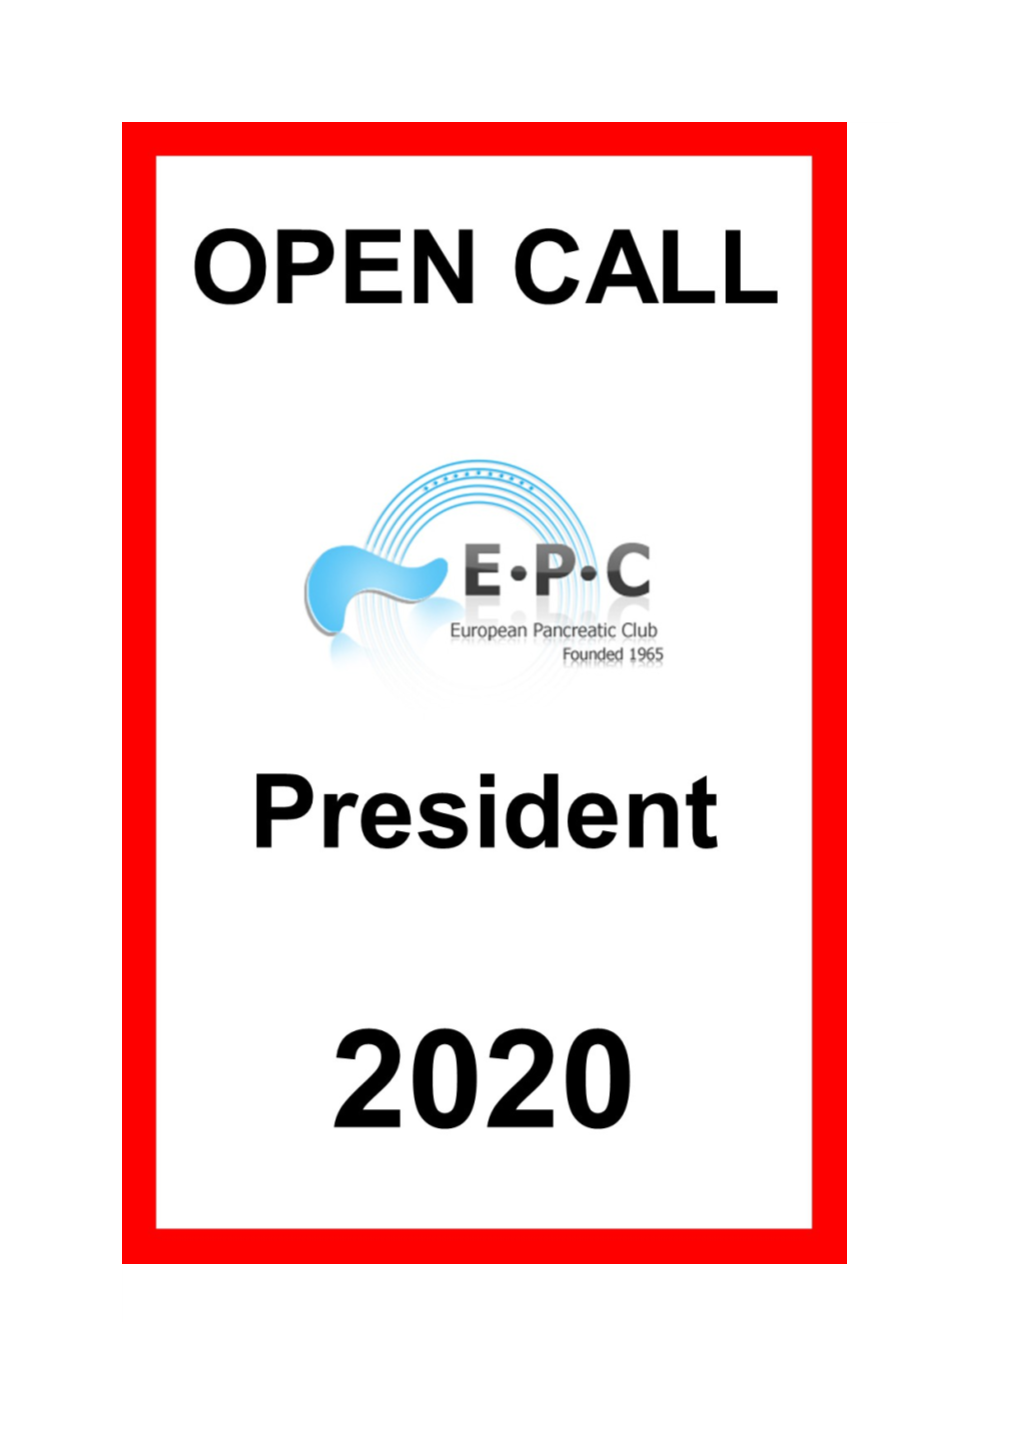 For President of the European Pancreatic Club2020 (Clinical Scientist)